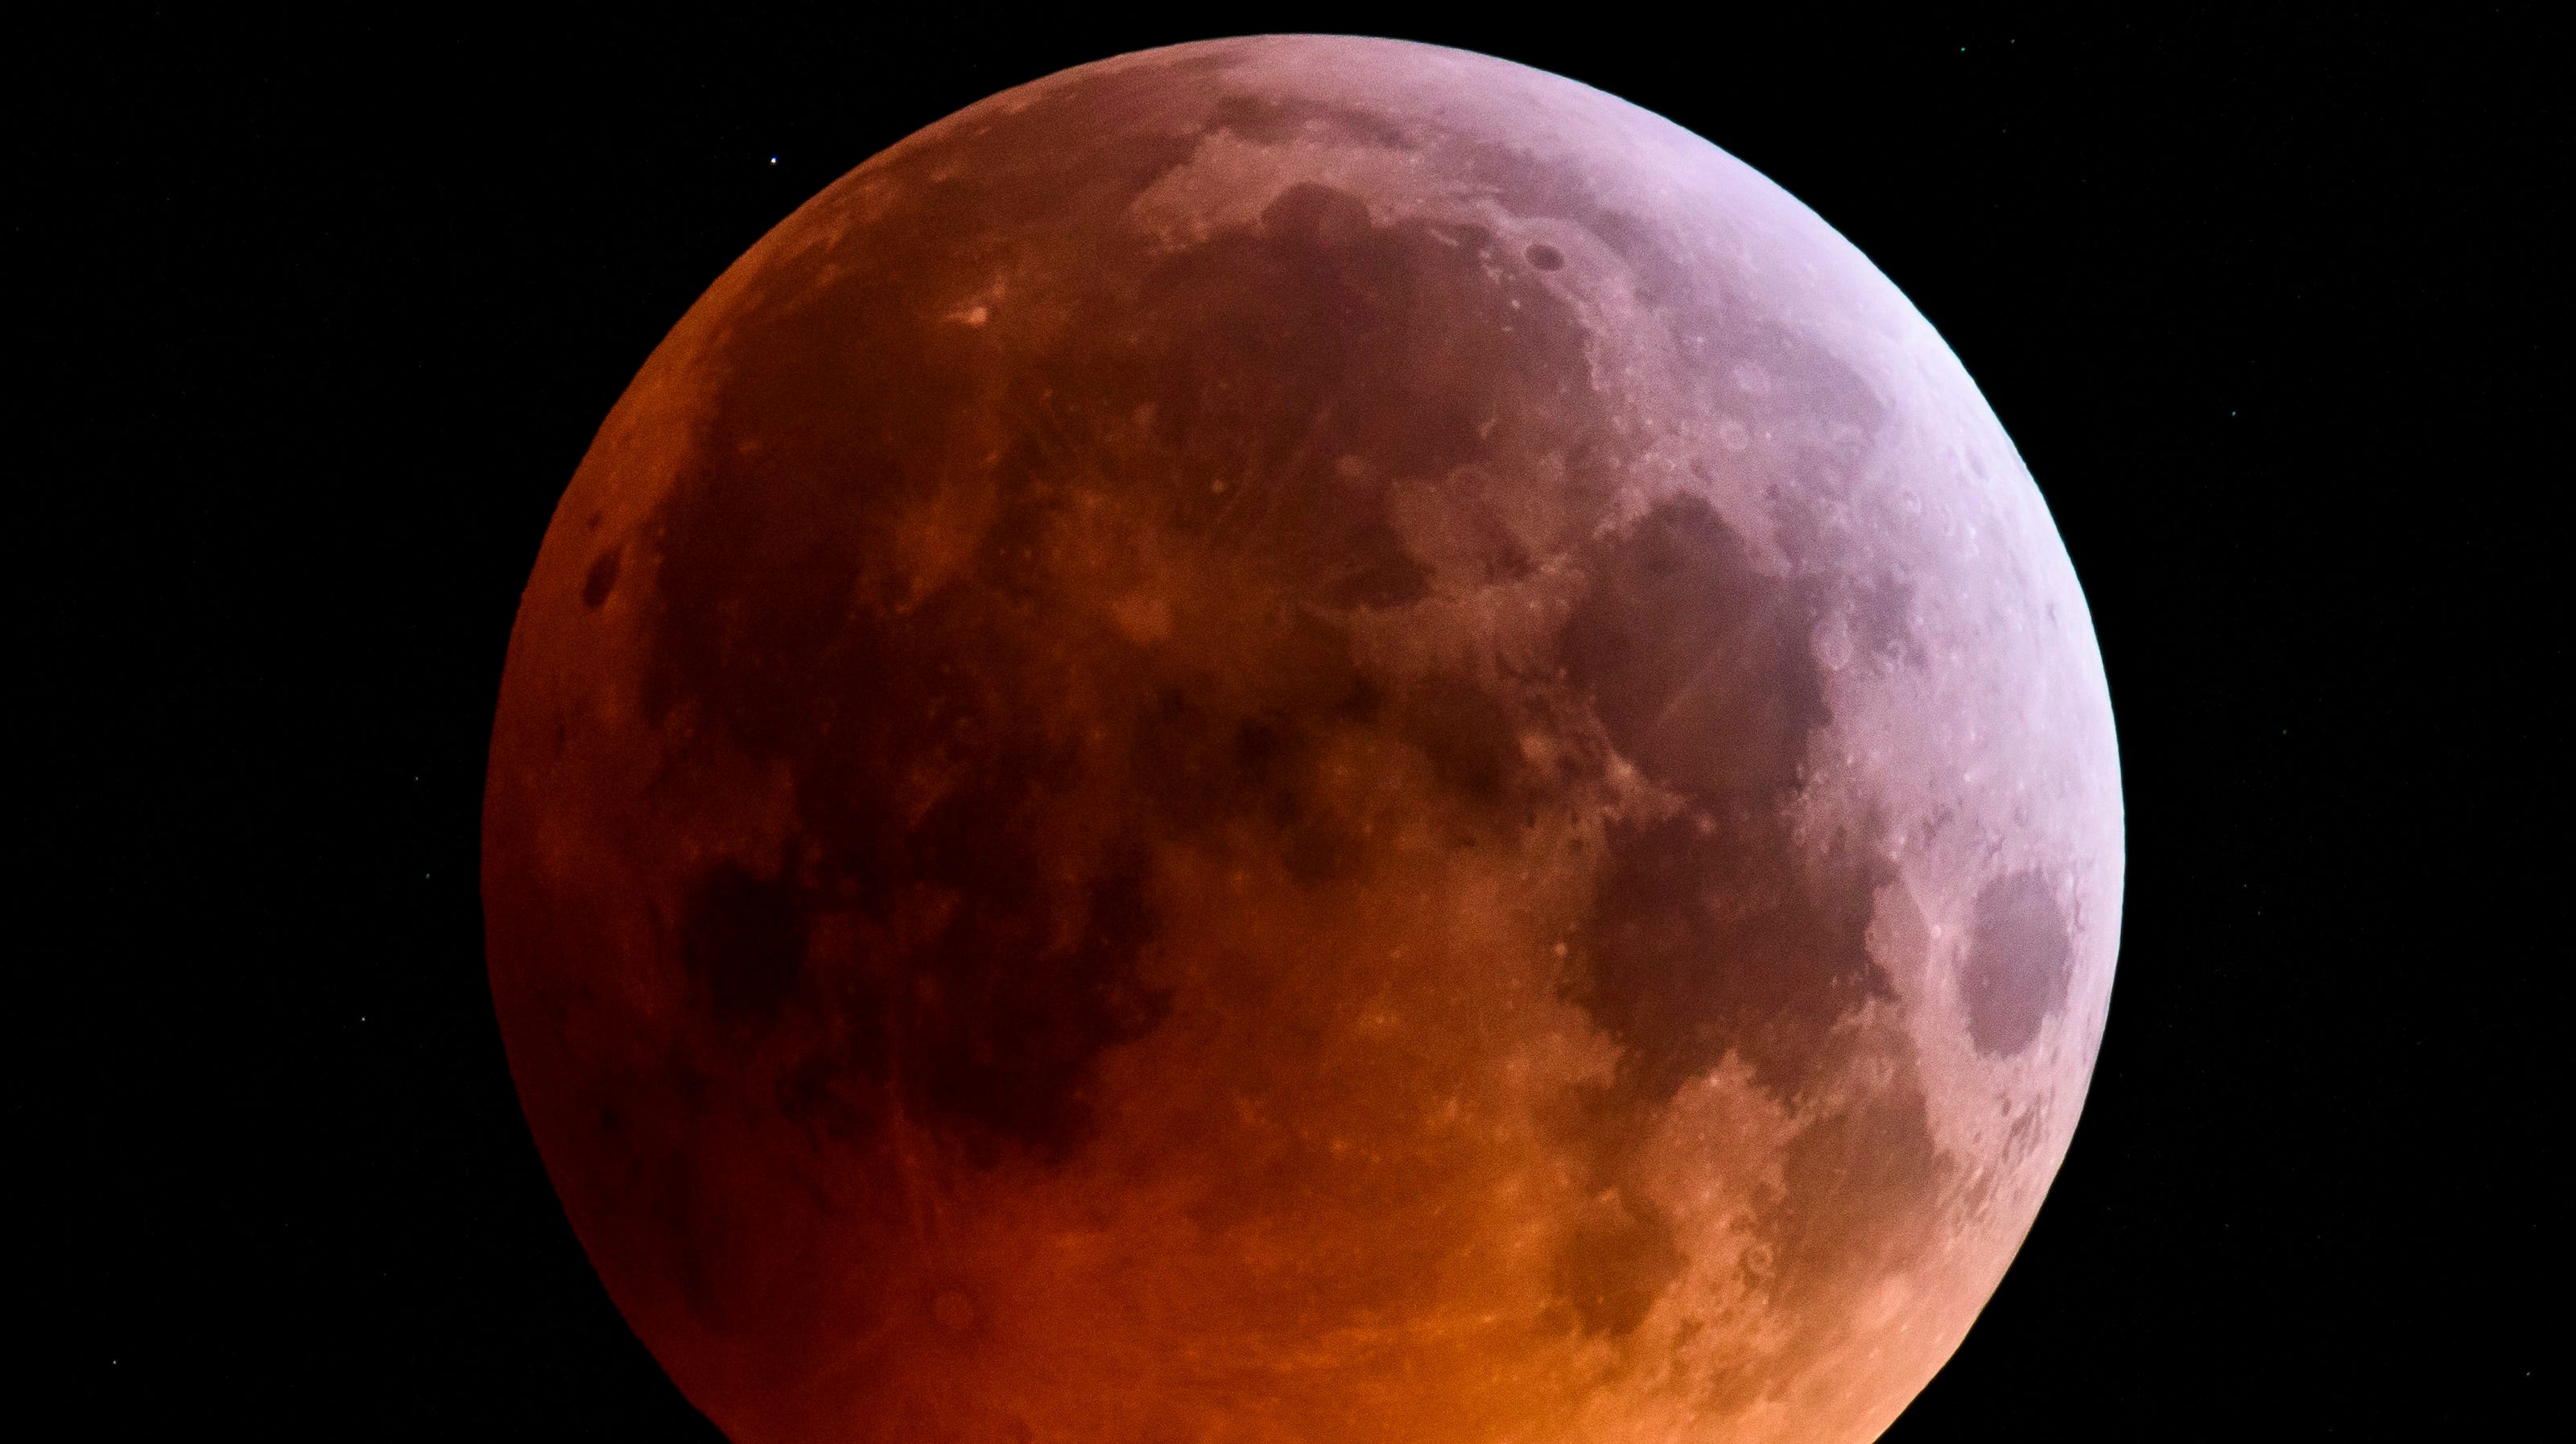 Lunar eclipse will occur Tuesday Best times to view the 'blood' moon